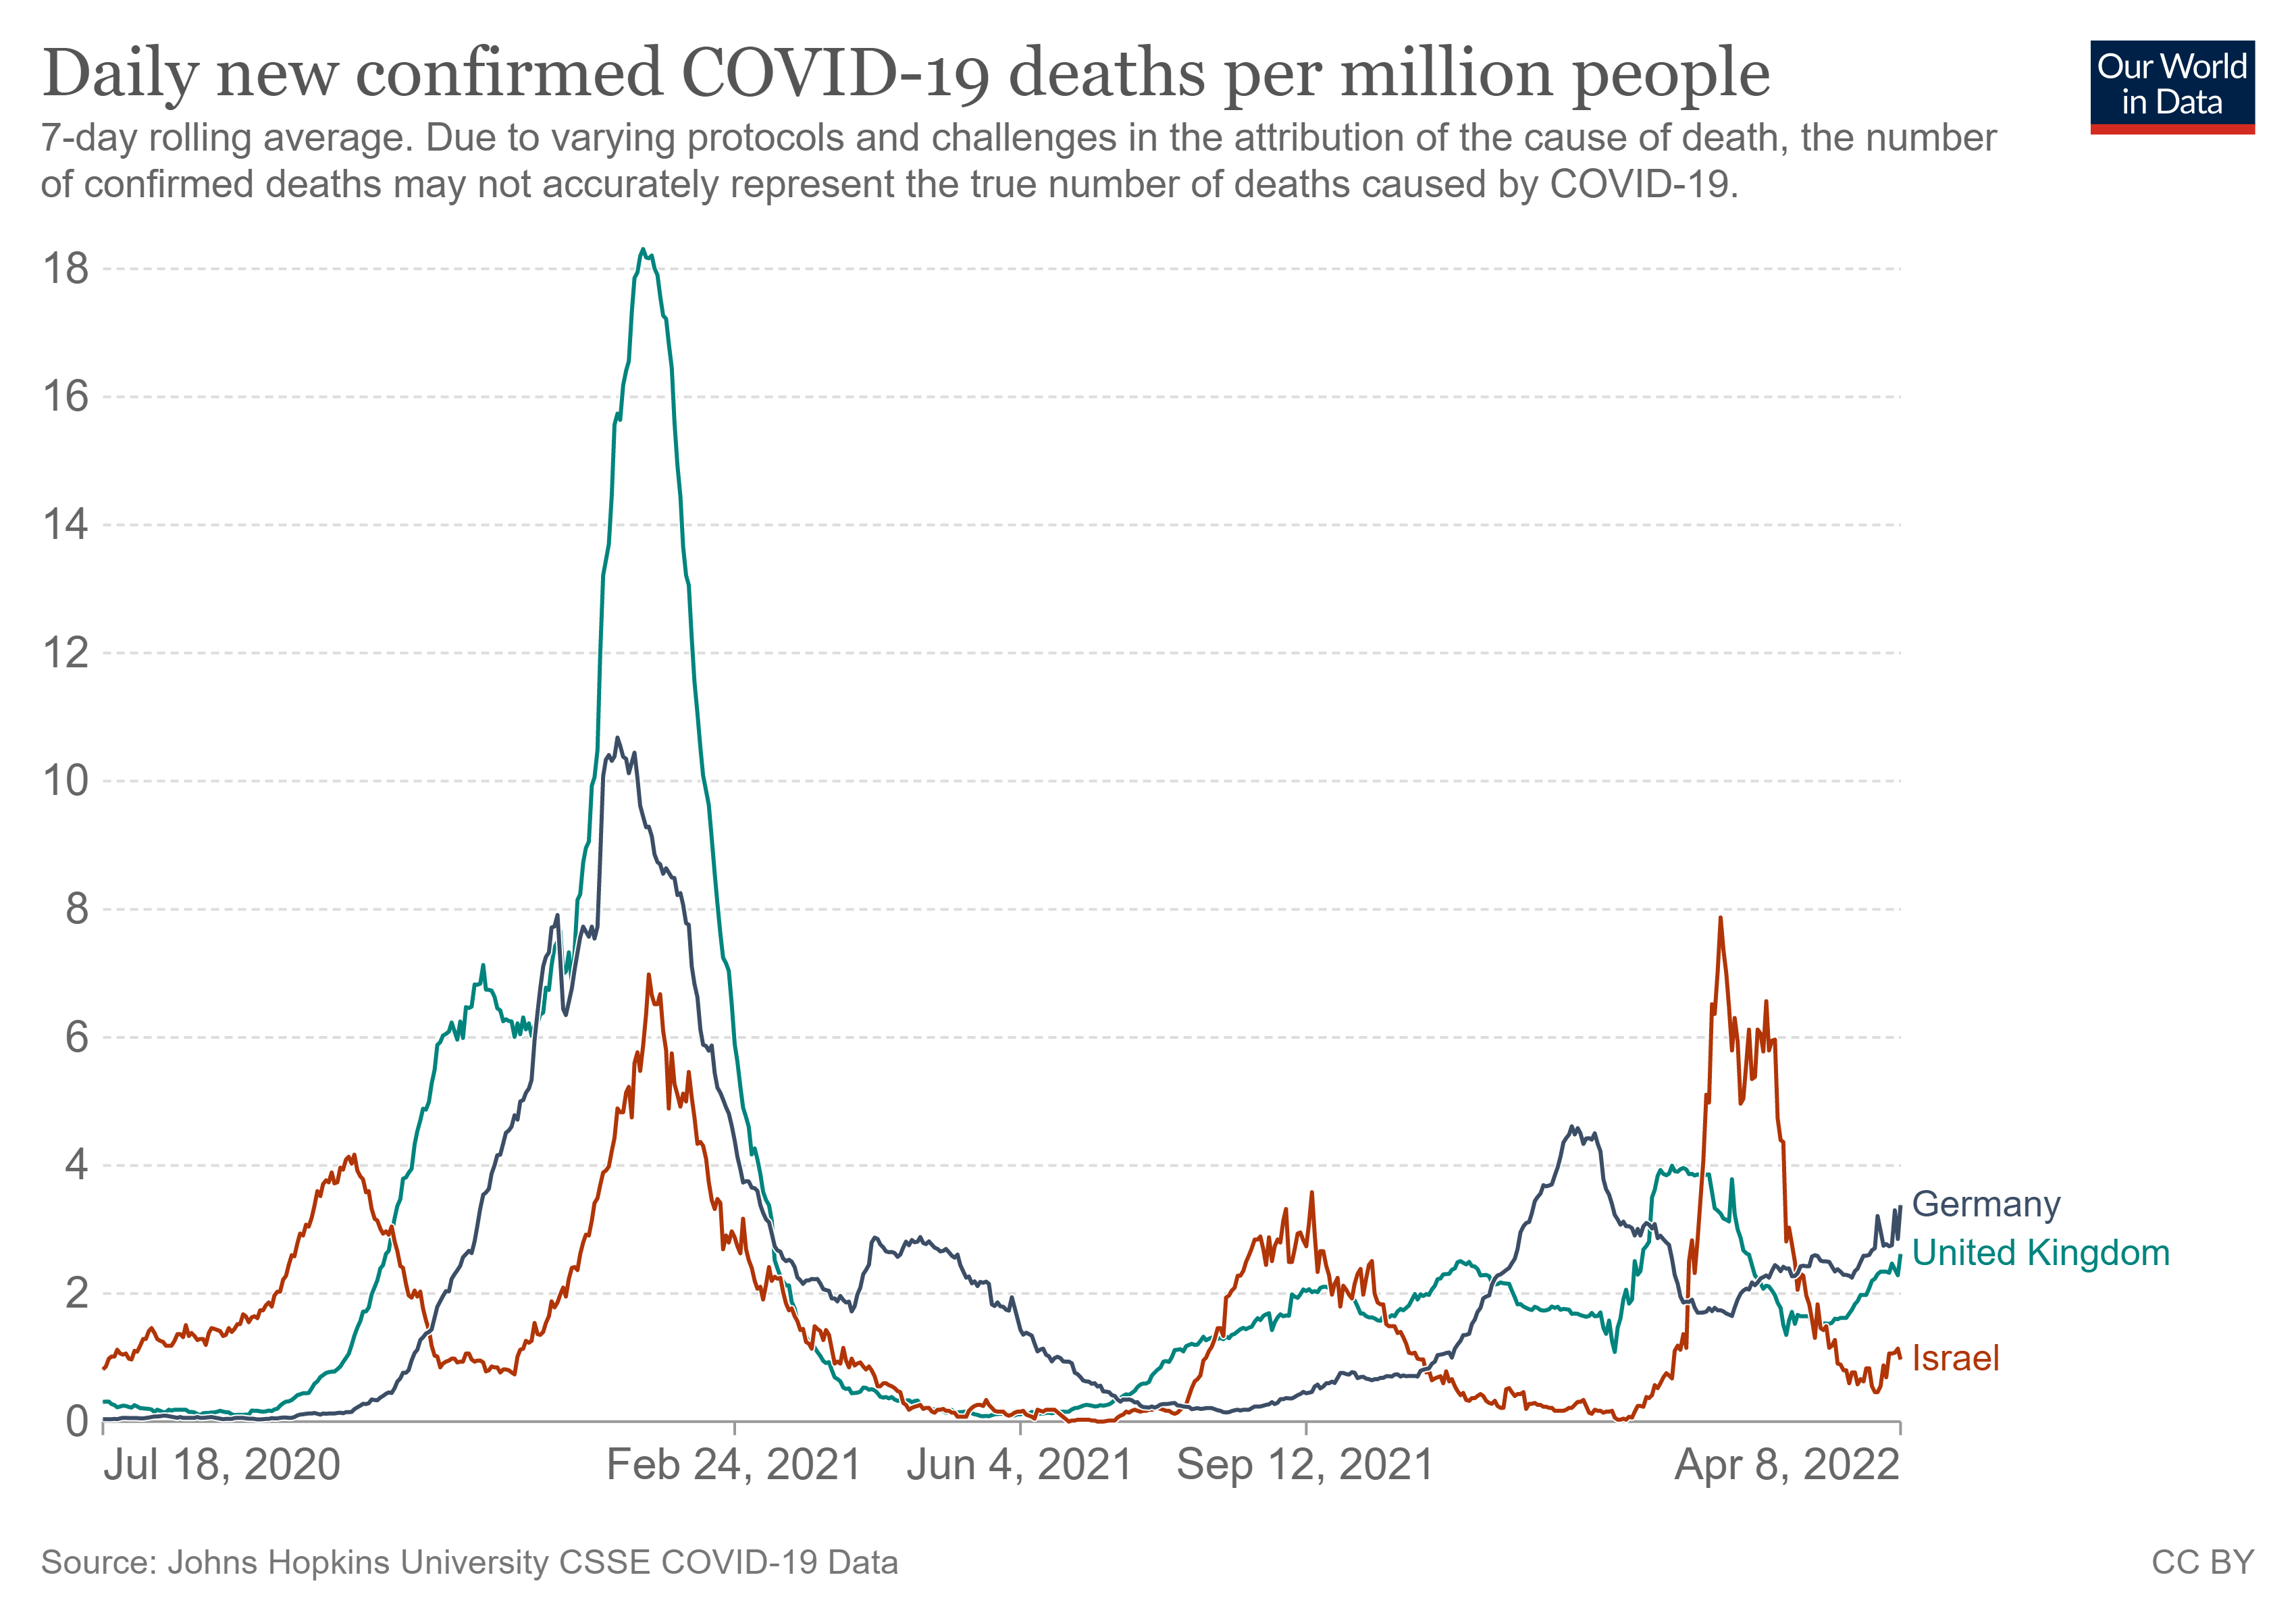 New daily confirmed COVID-19 deaths per million people in UK